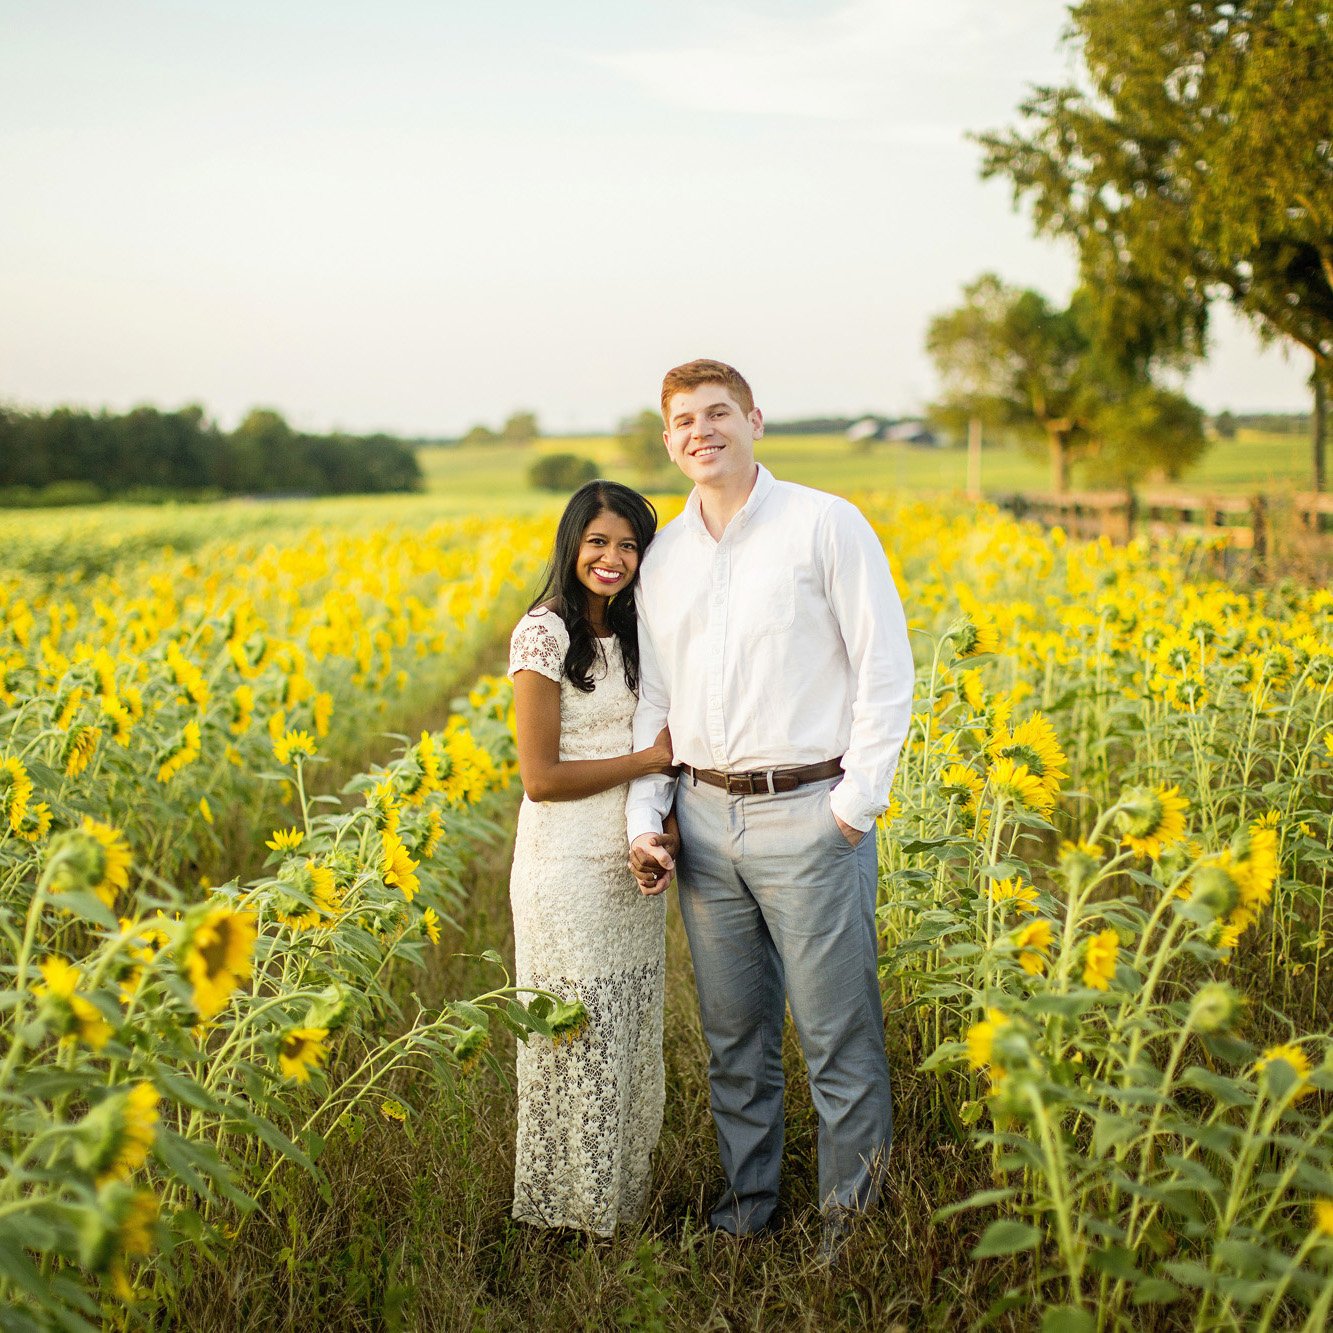 Seriously_Sabrina_Photography_Lexington_Midway_Kentucky_Engagement_Merefield_Sunflowers_Naz_and_Drew21.jpg